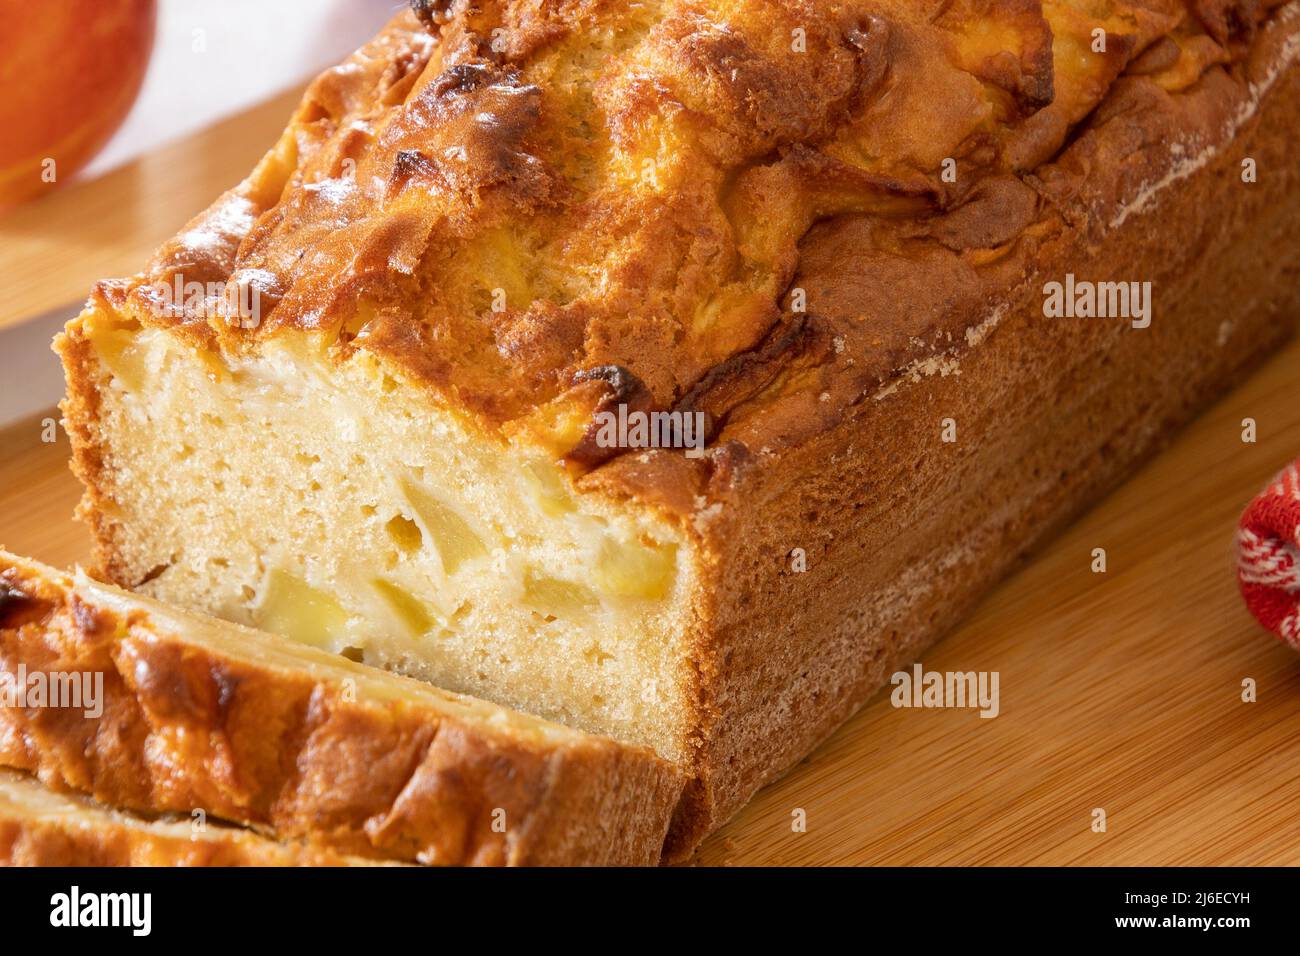 a cut apple cake on a wooden board Stock Photo